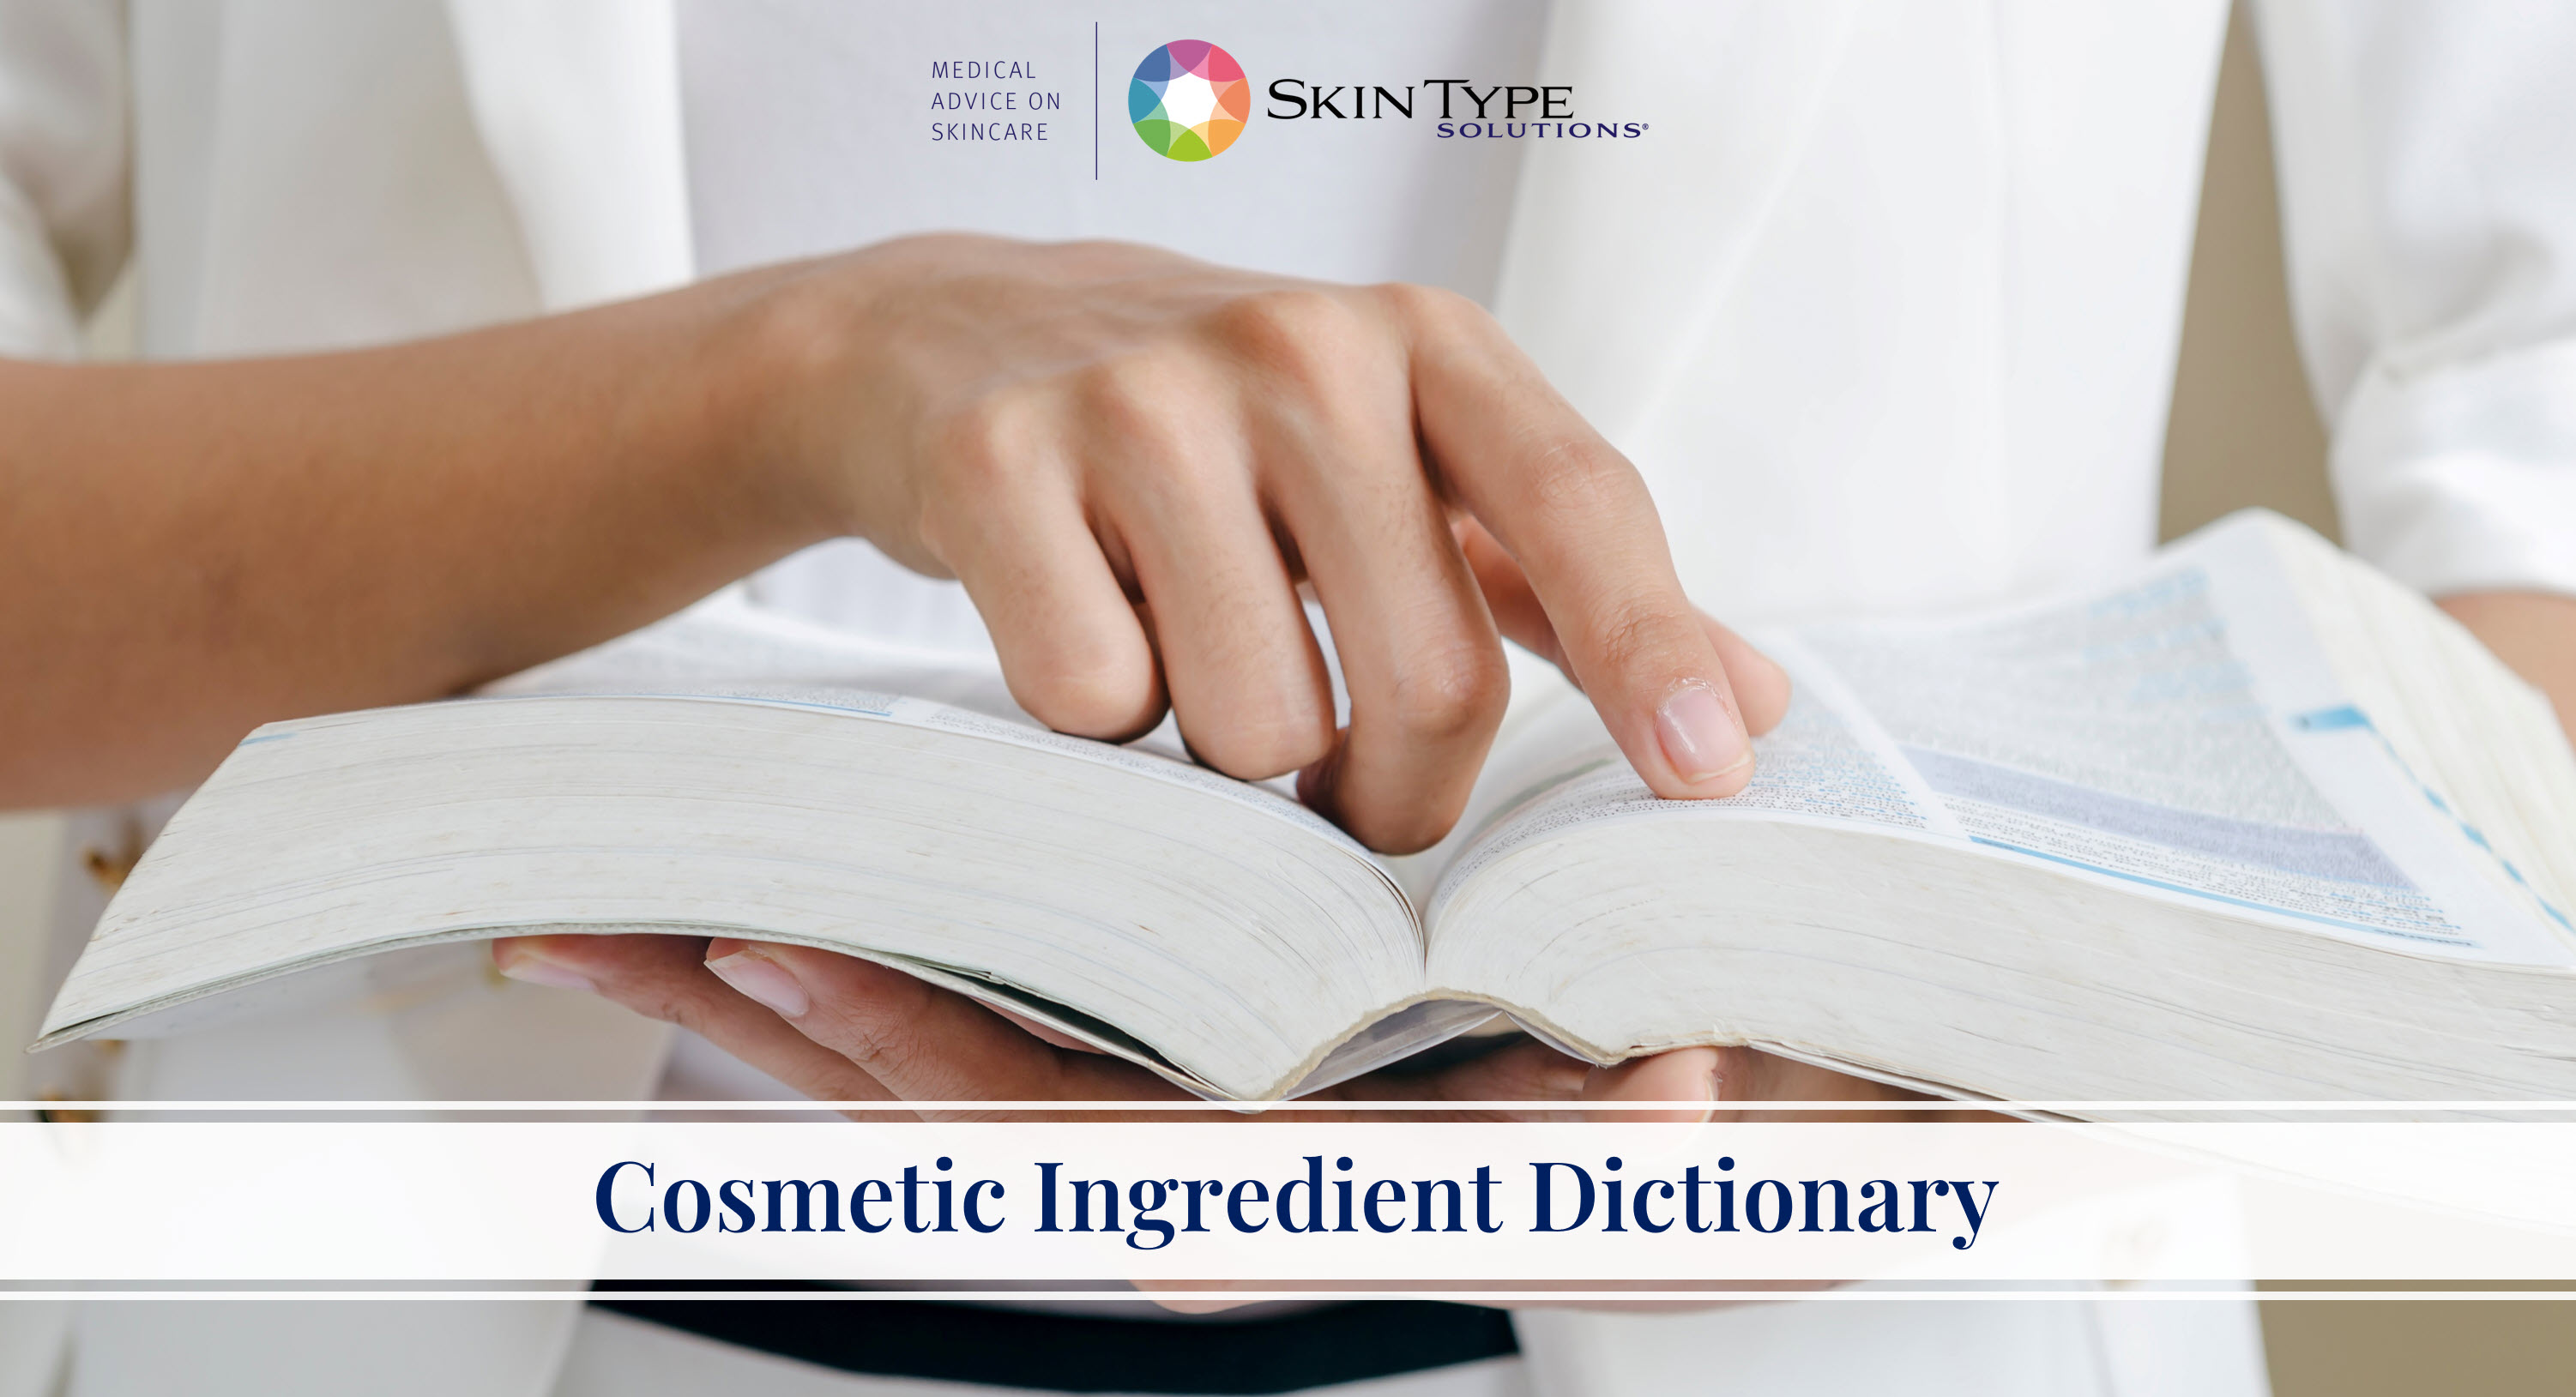 Cosmetic Ingredient Dictionary by Dermatologists